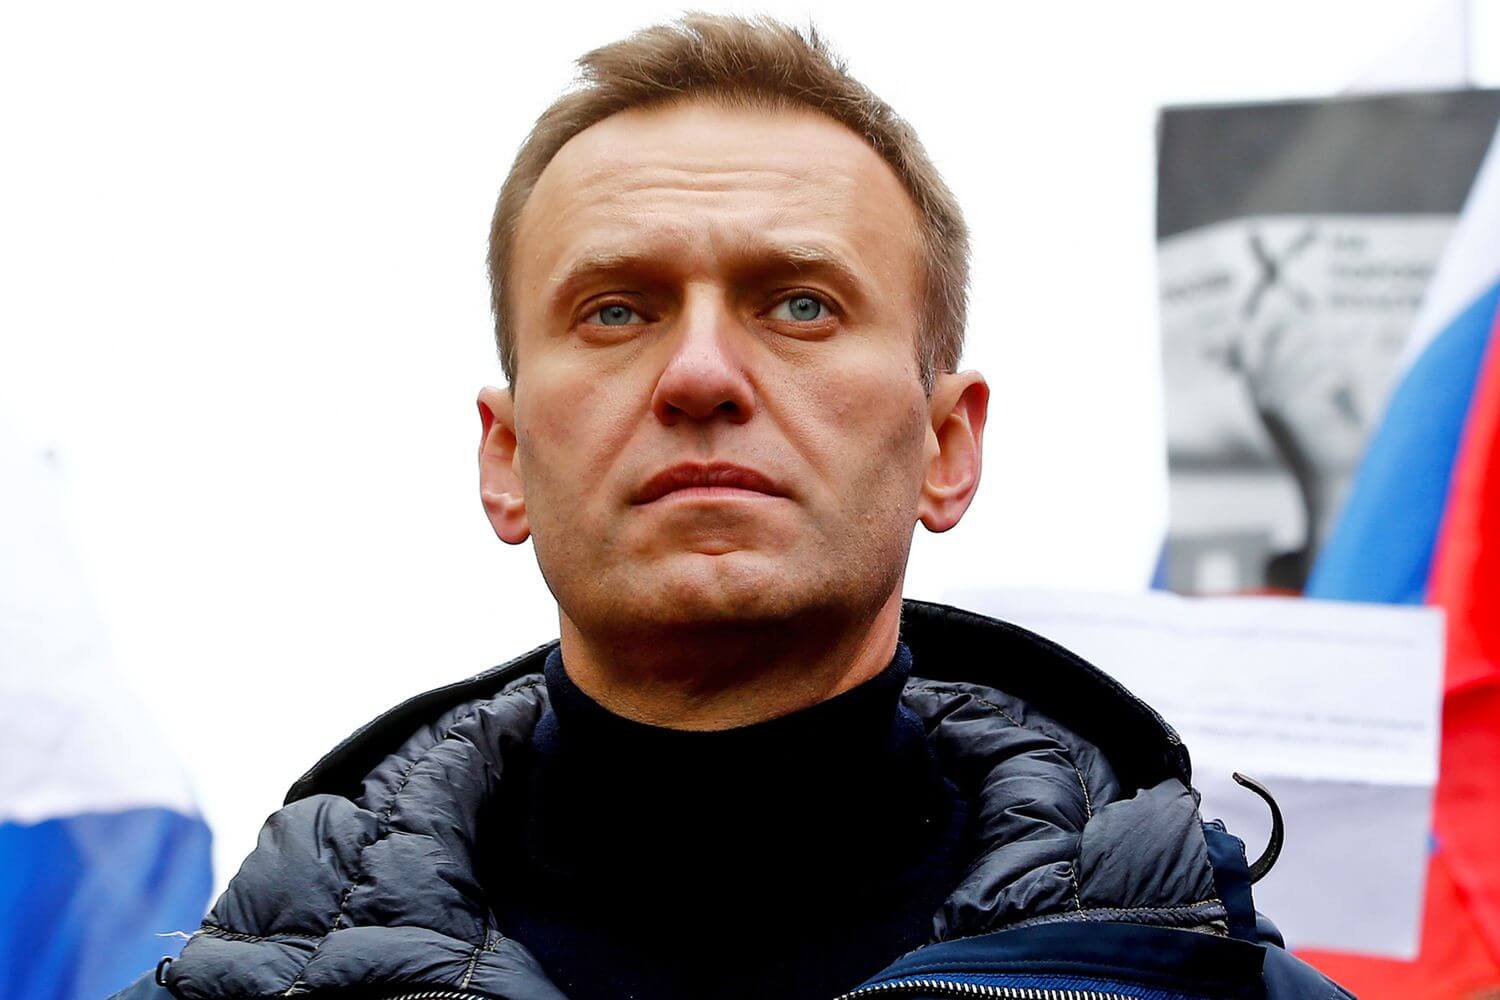 Alexei Navalny No More: Staunch Putin Critic ‘Fell Ill and Collapsed’ in Russian Arctic Jail